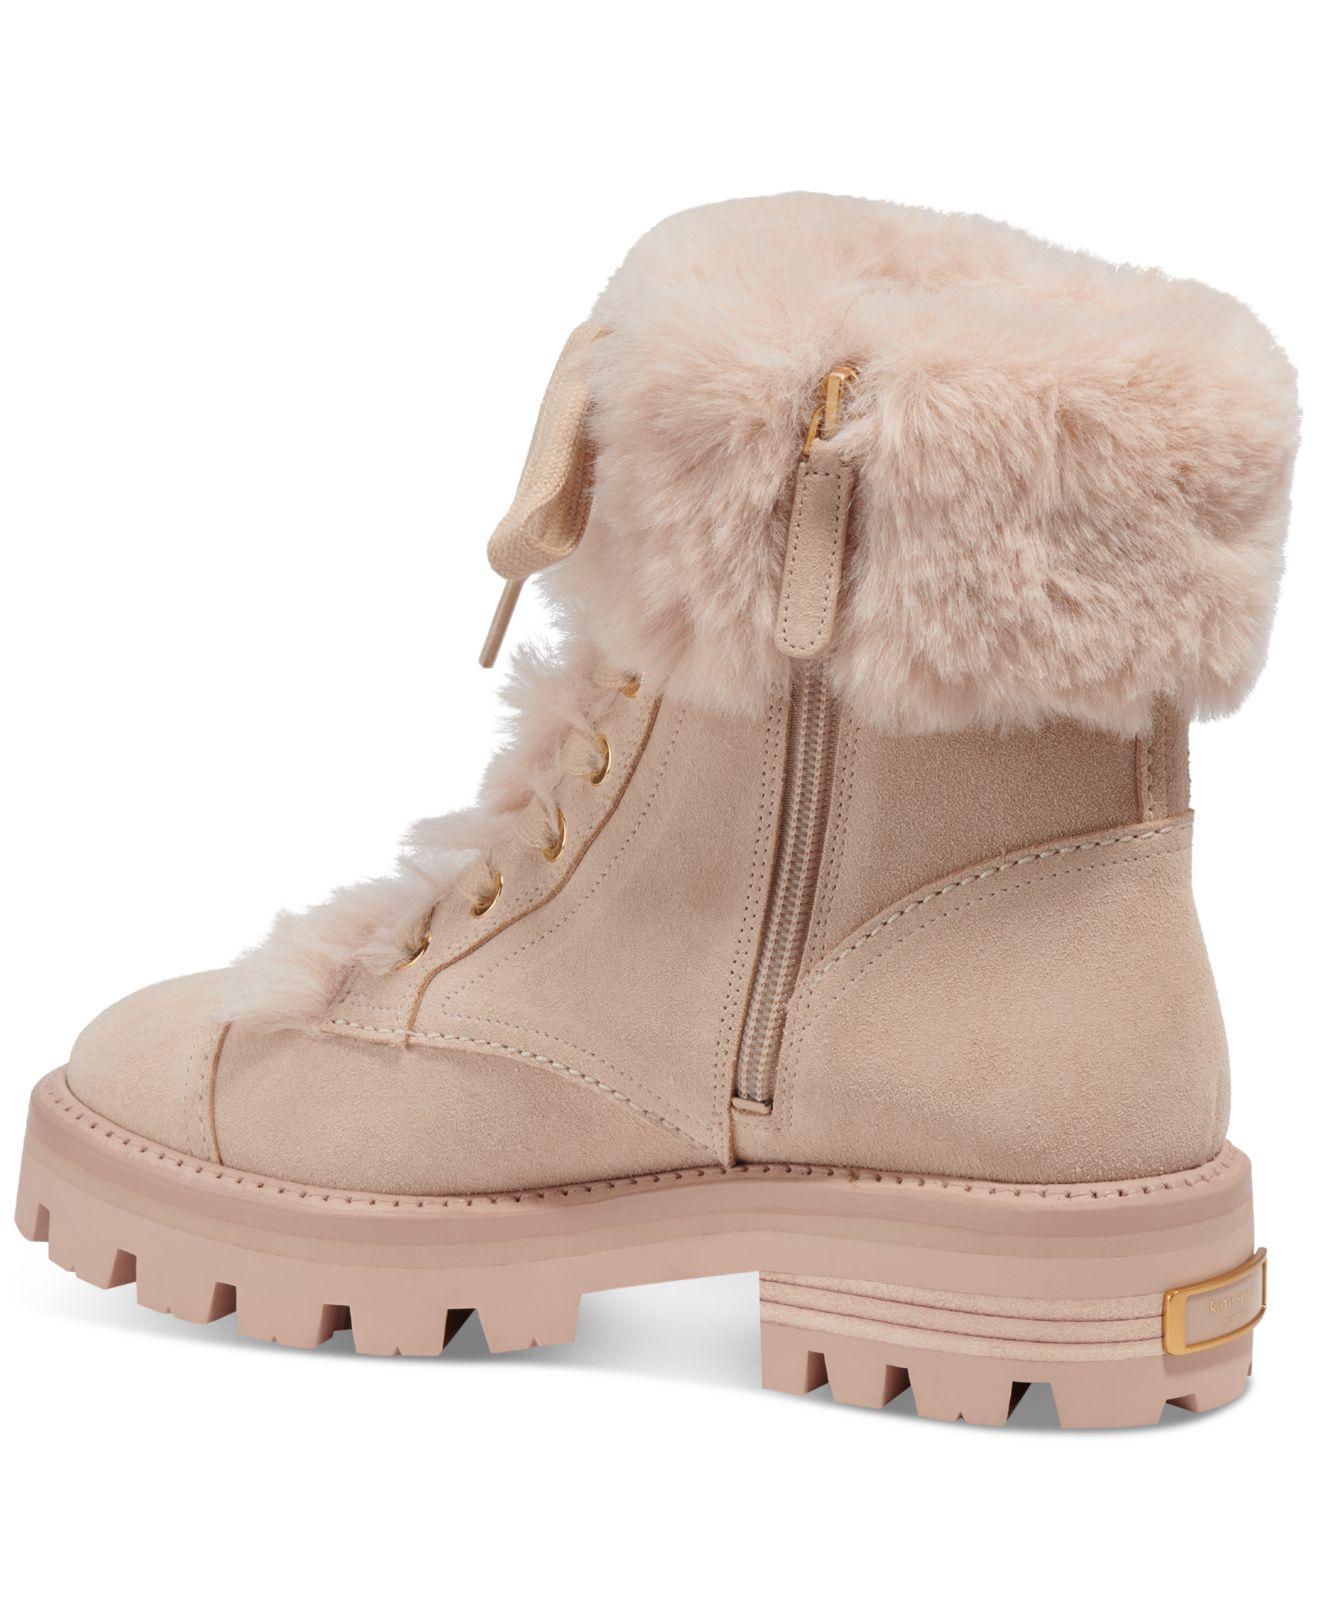 Kate Spade Merritt Lace-up Cold-weather Boots in Natural | Lyst